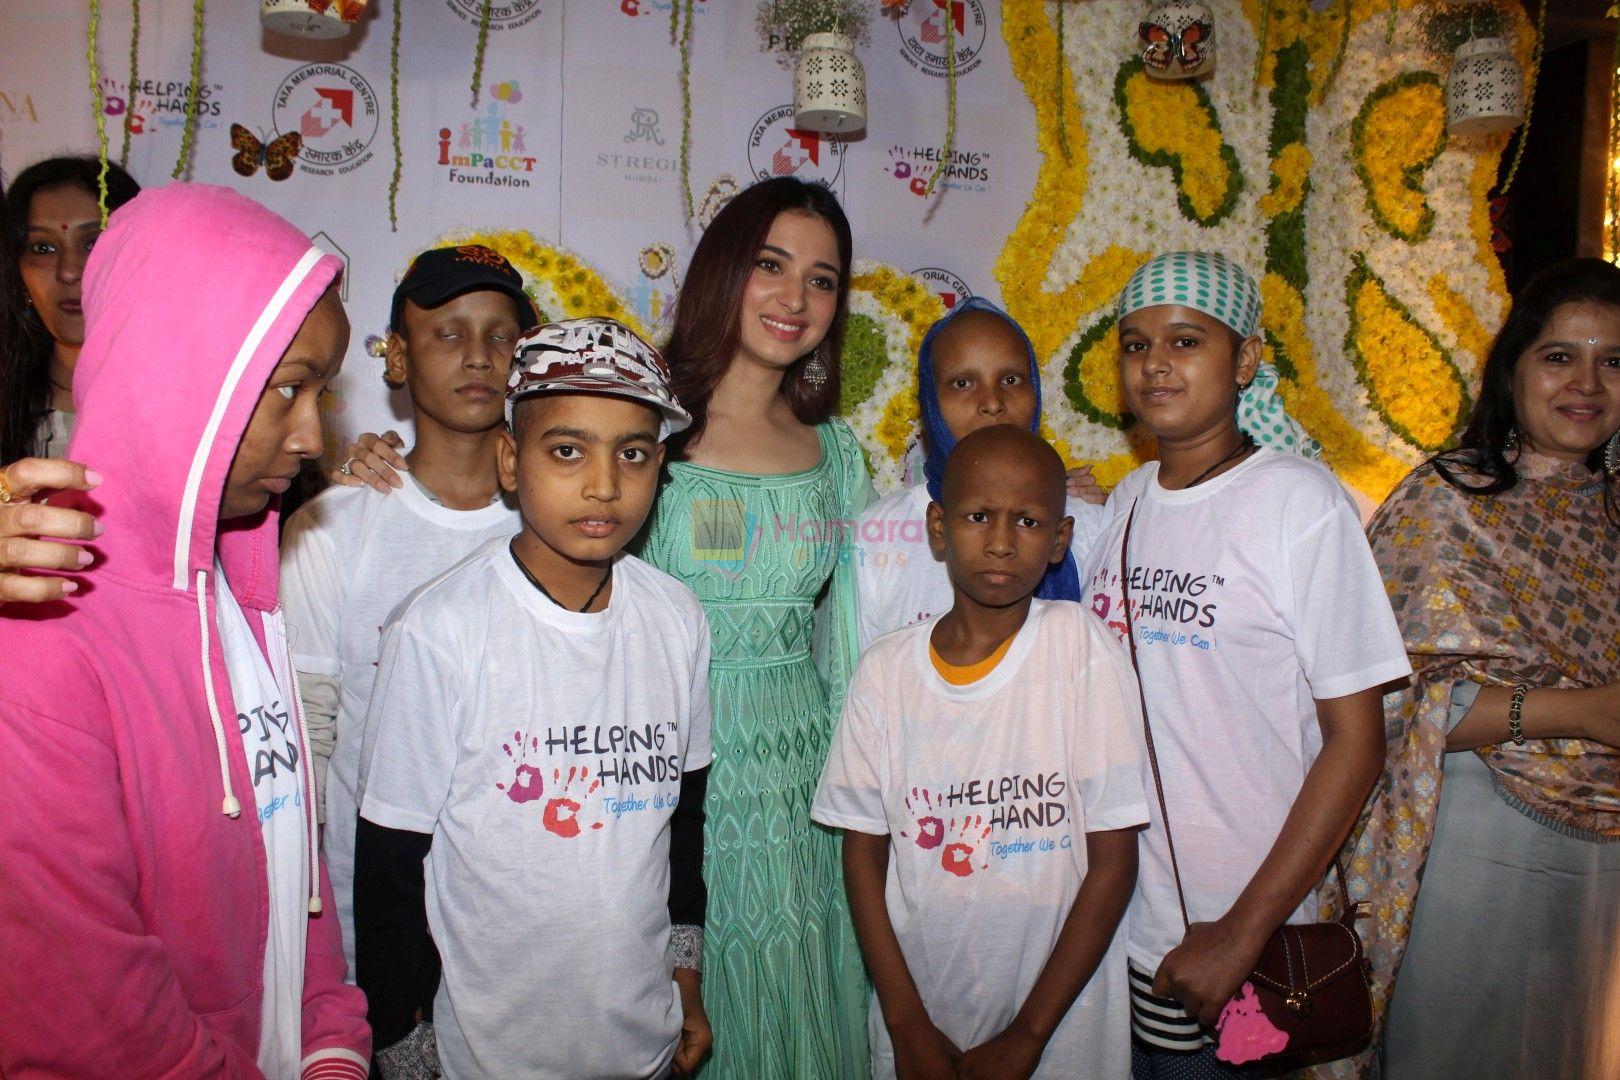 Tamannaah Bhatia Inaugurate Fundraiser Event For Cancer Suffering Kids on 3rd Oct 2017